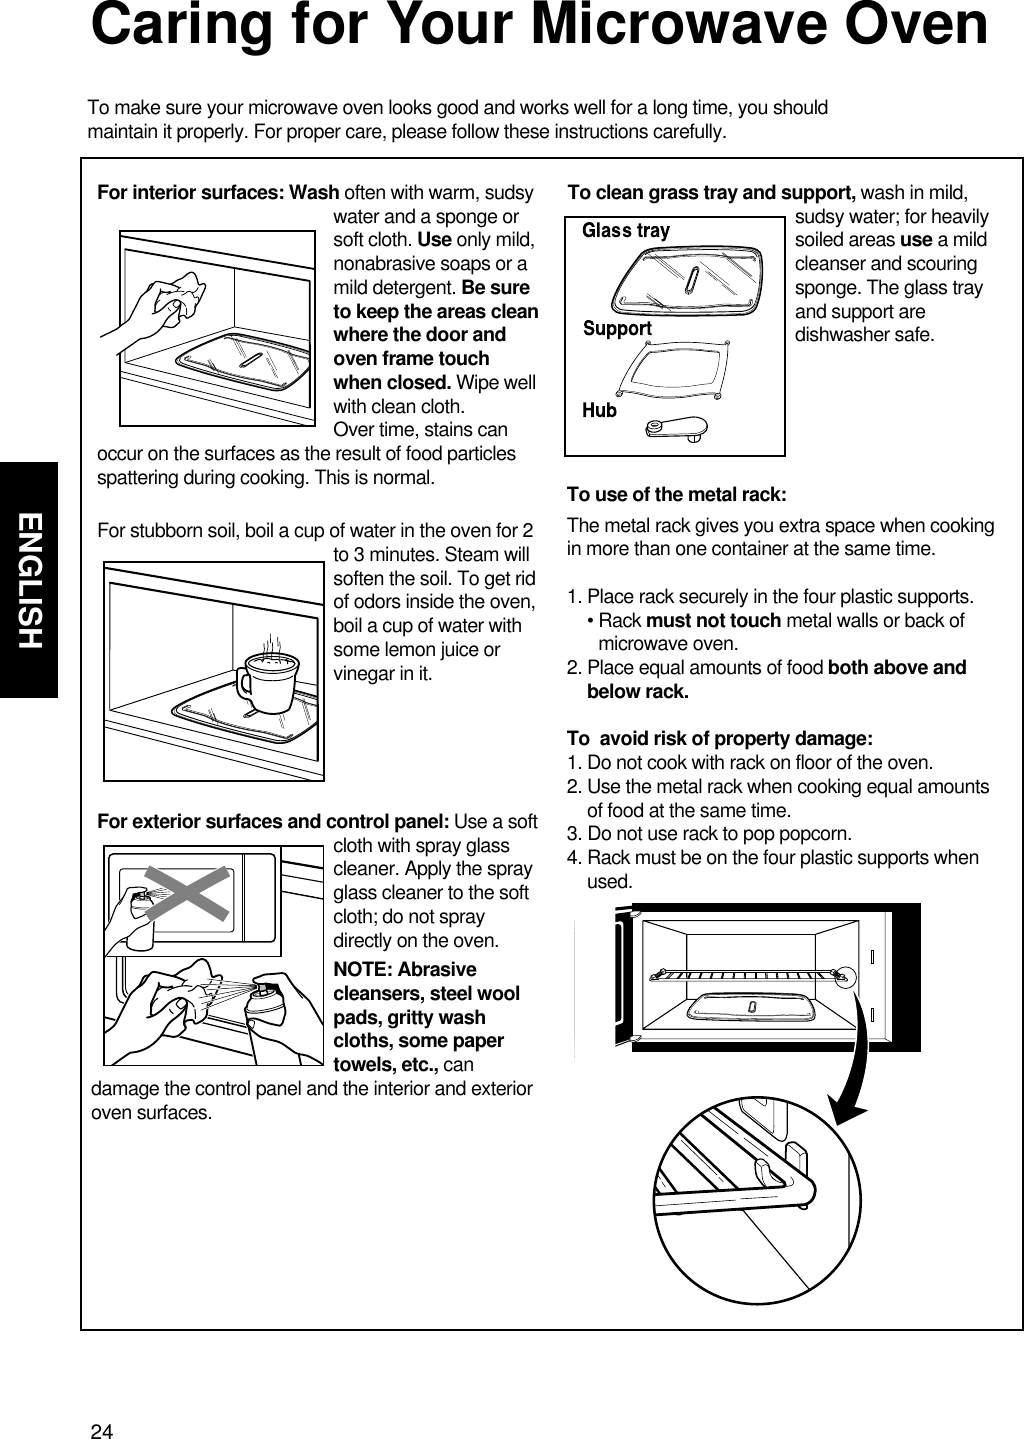 24ENGLISHCaring for Your Microwave OvenTo make sure your microwave oven looks good and works well for a long time, you shouldmaintain it properly. For proper care, please follow these instructions carefully.For interior surfaces: Wash often with warm, sudsywater and a sponge orsoft cloth. Use only mild,nonabrasive soaps or amild detergent. Be sureto keep the areas cleanwhere the door andoven frame touchwhen closed. Wipe wellwith clean cloth. Over time, stains canoccur on the surfaces as the result of food particlesspattering during cooking. This is normal.For stubborn soil, boil a cup of water in the oven for 2to 3 minutes. Steam willsoften the soil. To get ridof odors inside the oven,boil a cup of water withsome lemon juice orvinegar in it.For exterior surfaces and control panel: Use a softcloth with spray glasscleaner. Apply the sprayglass cleaner to the softcloth; do not spraydirectly on the oven.NOTE: Abrasivecleansers, steel woolpads, gritty washcloths, some papertowels, etc., can damage the control panel and the interior and exterioroven surfaces.To clean grass tray and support, wash in mild,sudsy water; for heavilysoiled areas use a mildcleanser and scouringsponge. The glass trayand support aredishwasher safe.To use of the metal rack:The metal rack gives you extra space when cookingin more than one container at the same time. 1. Place rack securely in the four plastic supports. • Rack must not touch metal walls or back ofmicrowave oven.2. Place equal amounts of food both above andbelow rack.To  avoid risk of property damage:1. Do not cook with rack on floor of the oven. 2. Use the metal rack when cooking equal amountsof food at the same time. 3. Do not use rack to pop popcorn. 4. Rack must be on the four plastic supports whenused.